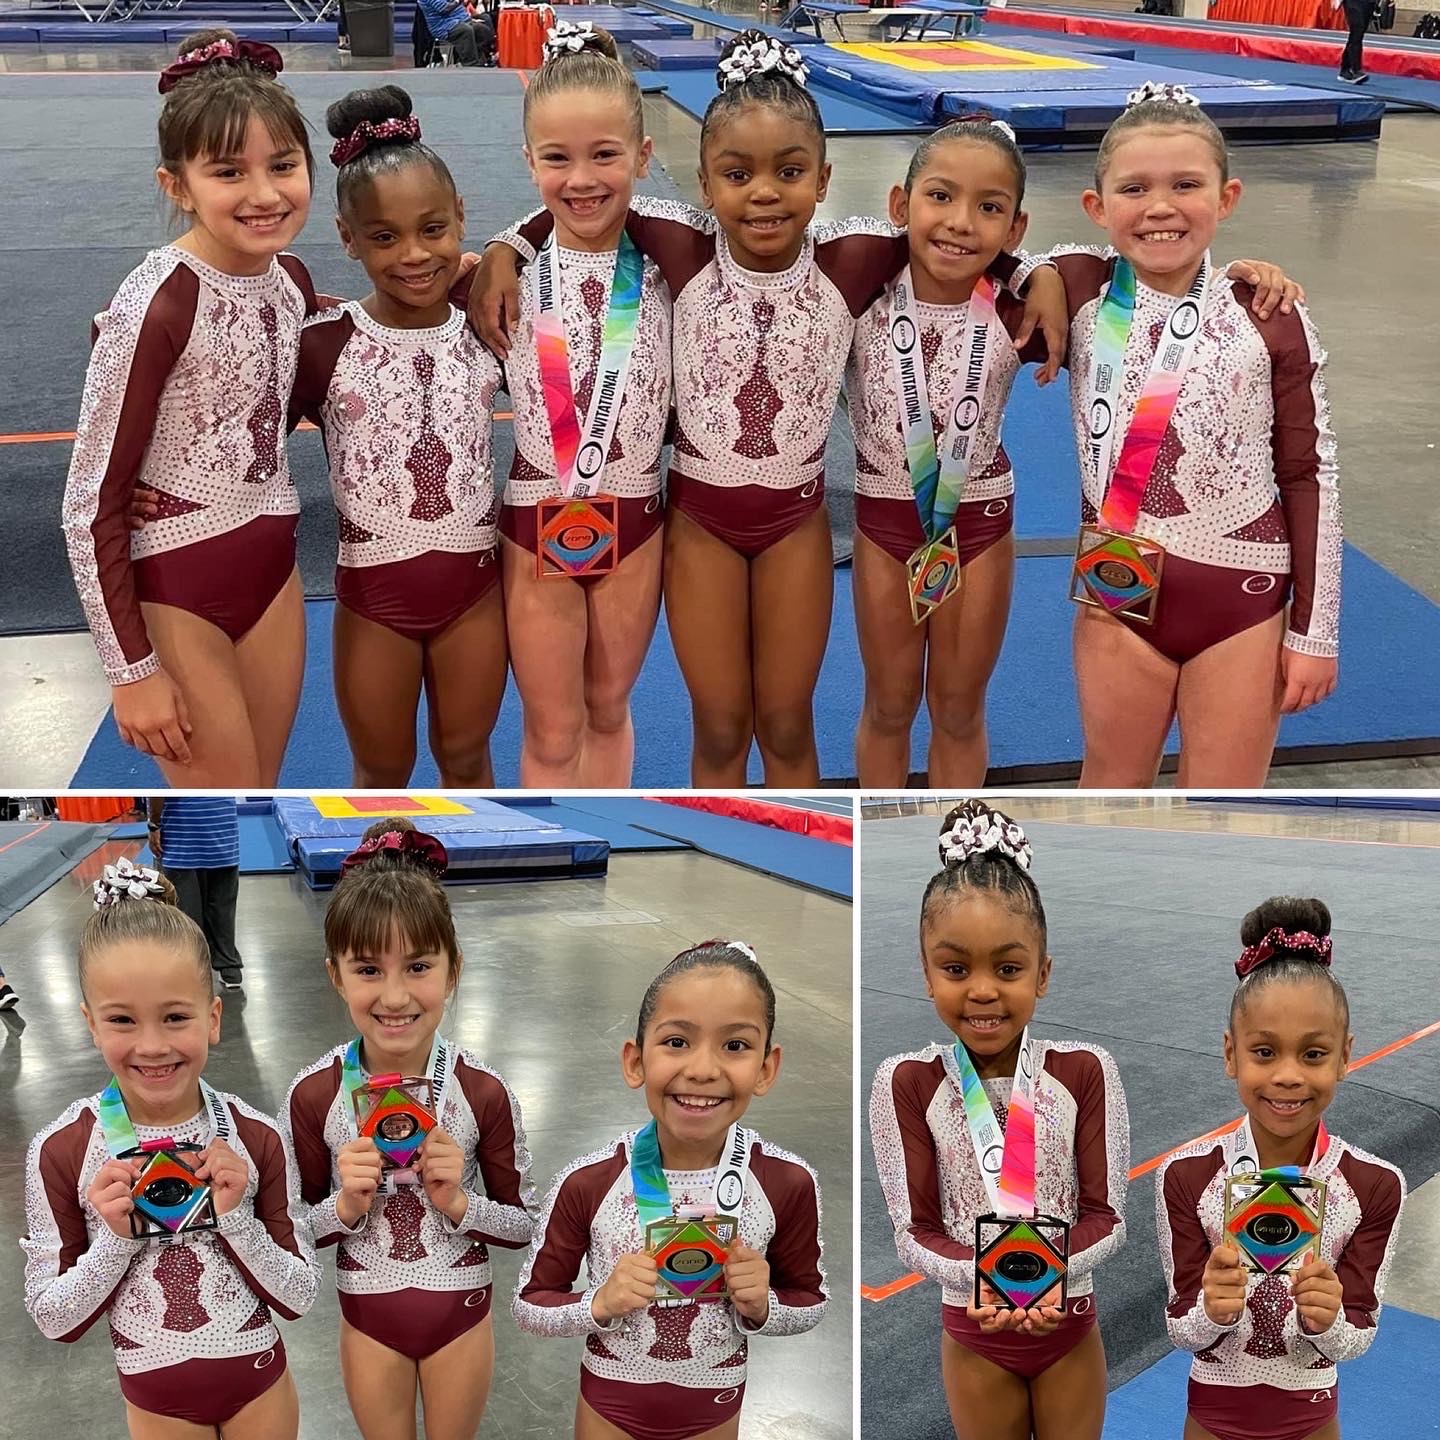 JJ Tumbling and Trampoline athletes compete in national competitions